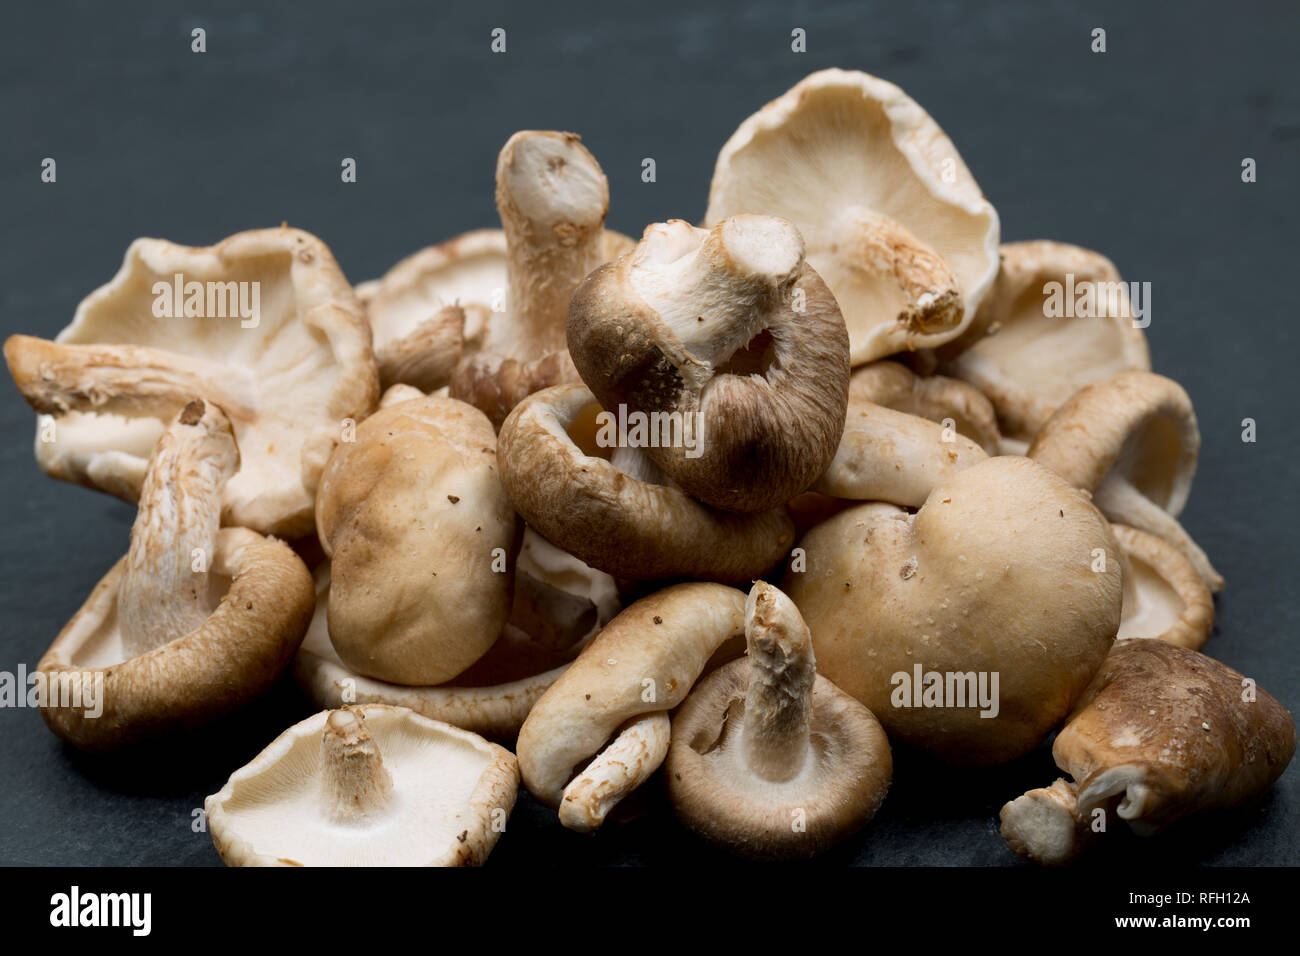 A heap of uncooked shiitake mushrooms bought from a supermarket in the UK on a dark, stone background. Dorset England UK GB Stock Photo